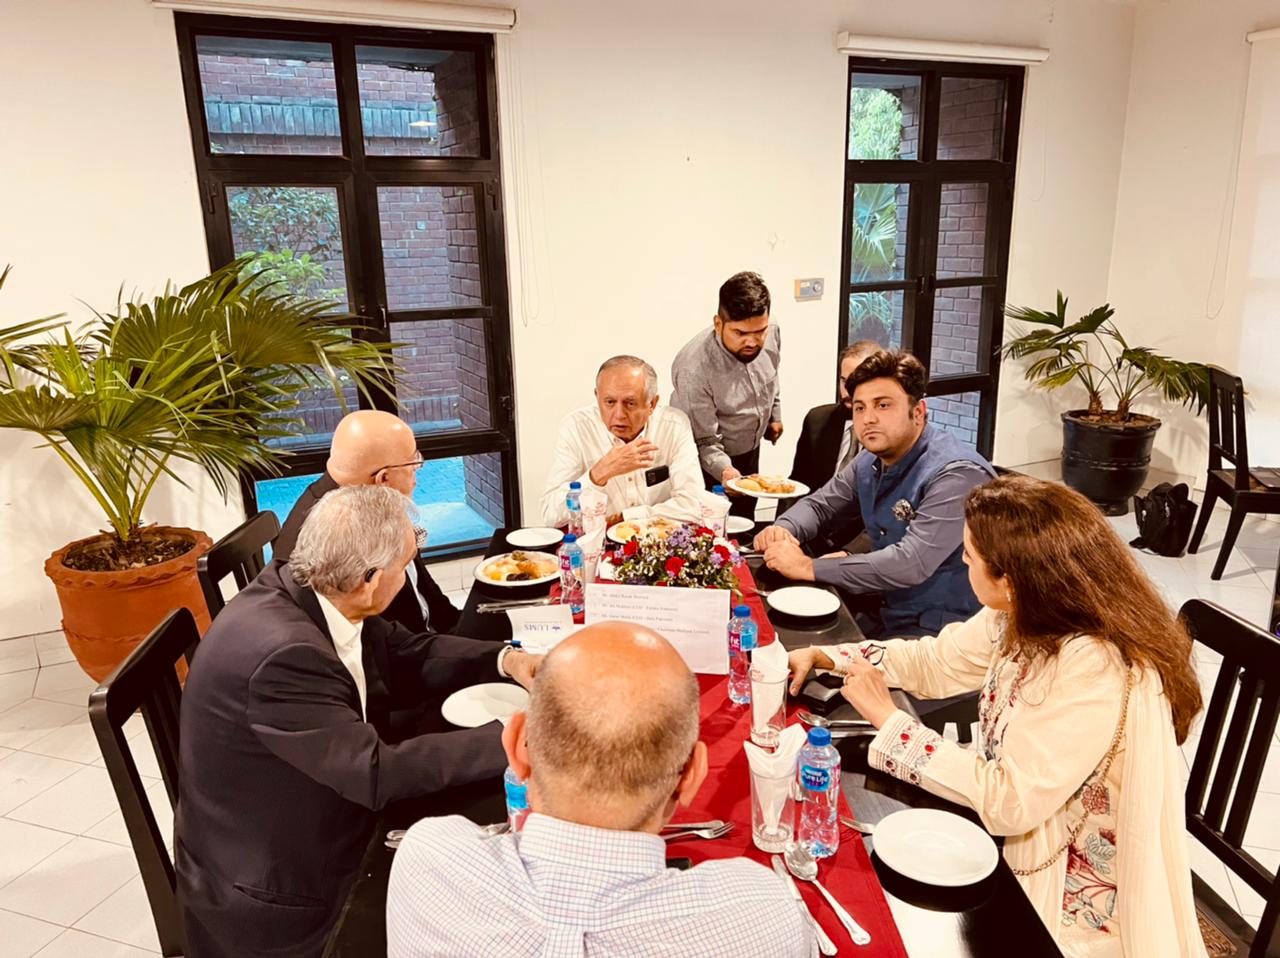 Mr. Qasim Malik, Vice President Sialkot Chamber of Commerce & Industry attended the Iftar Dinner hosted by Lahore University of Management Sciences (LUMS) on April 28, 2022.   Mr. Abdul Razzak Dawood, Former Advisor to PM on Commerce & Investment was also present.